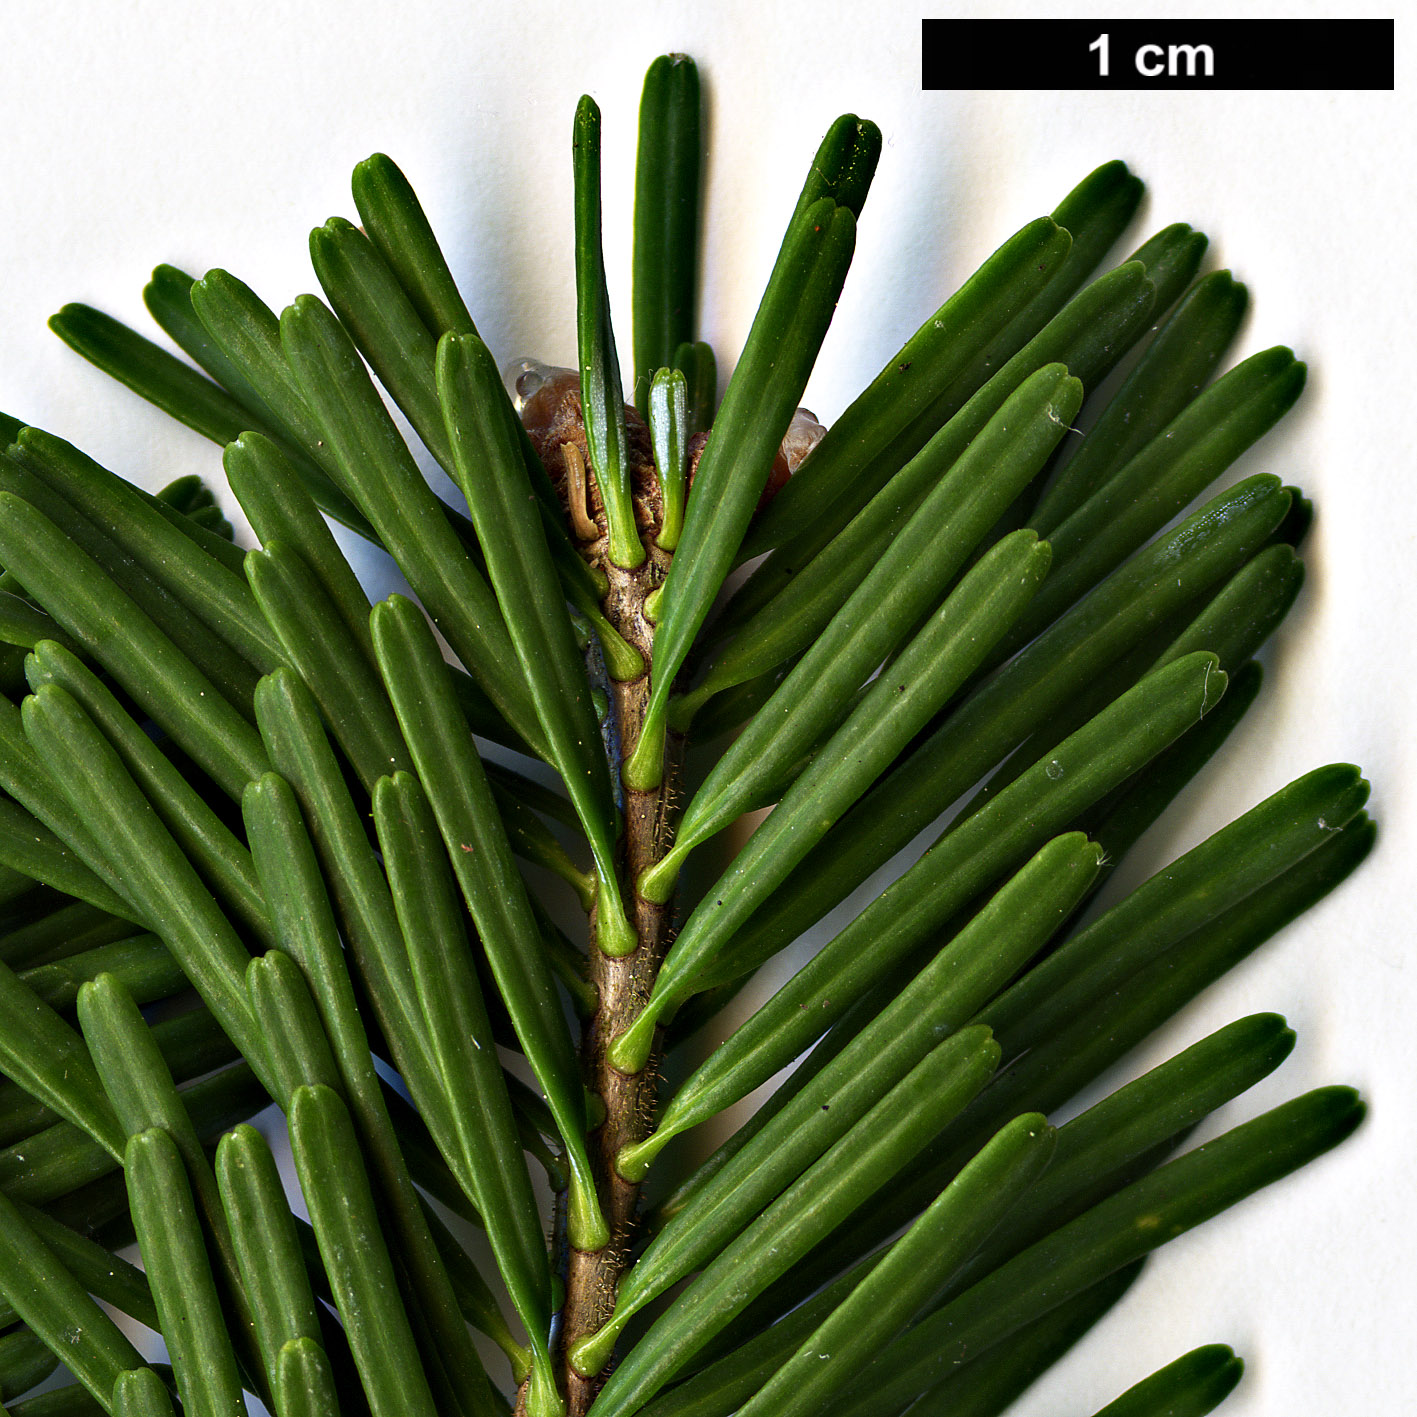 High resolution image: Family: Pinaceae - Genus: Abies - Taxon: nephrolepis